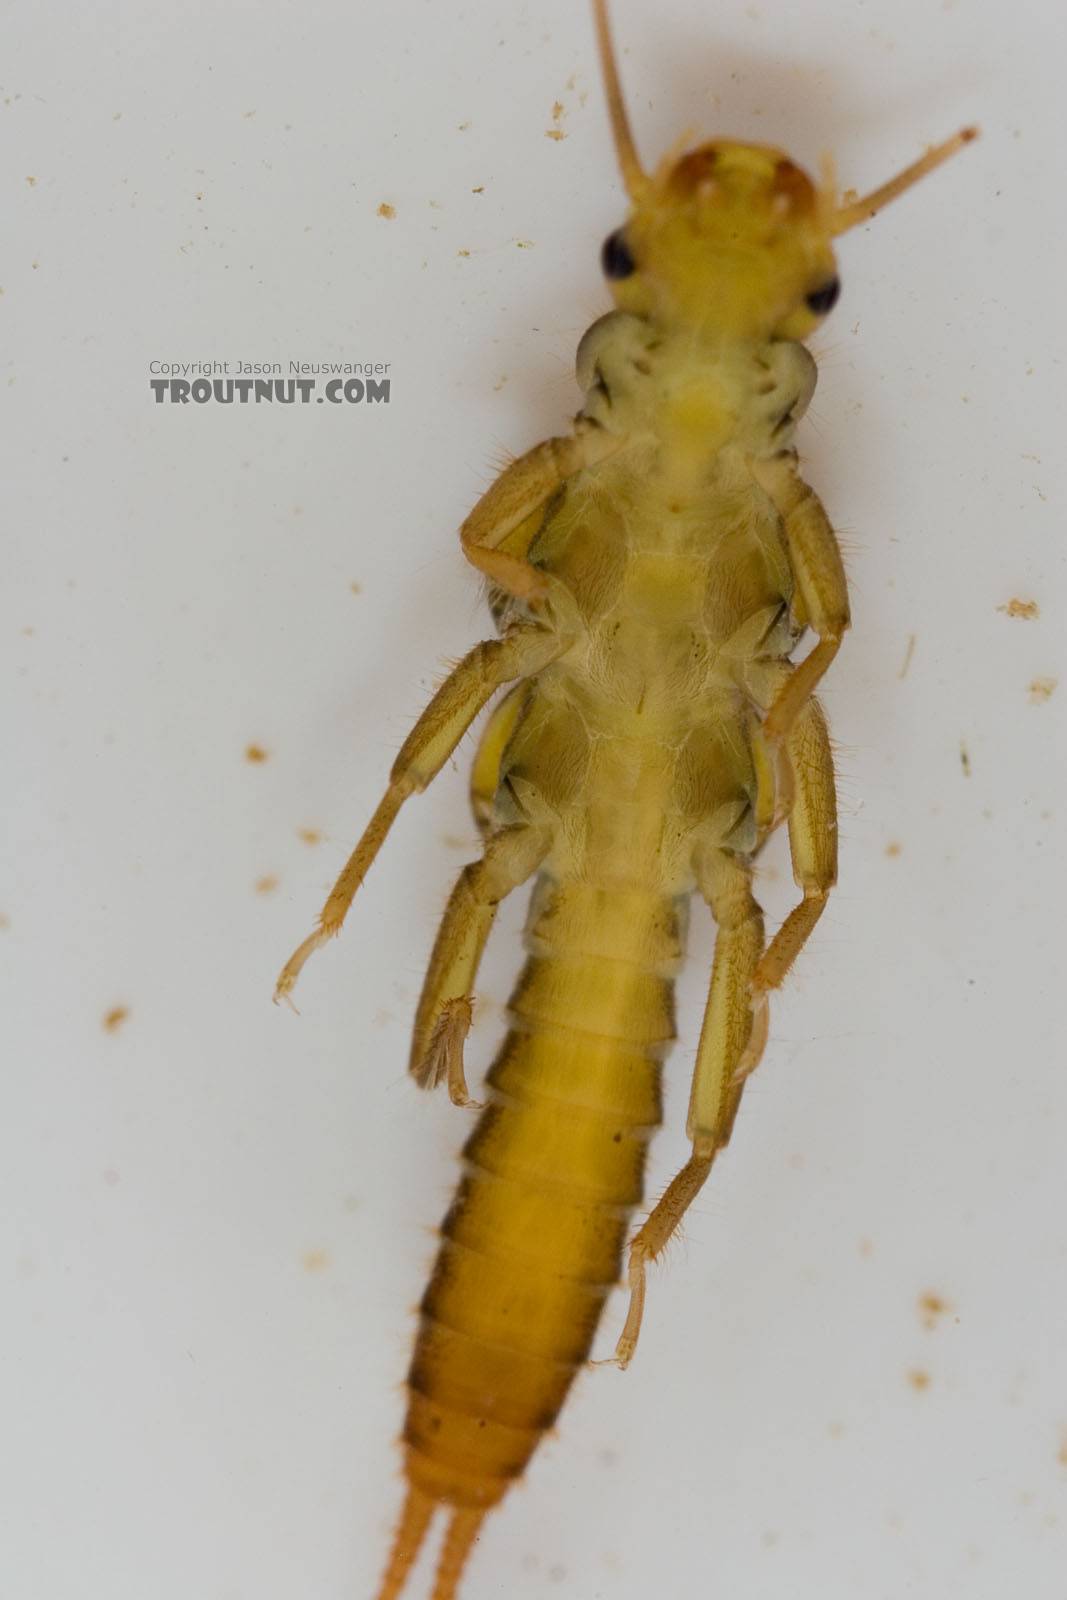 Sweltsa (Sallflies) Stonefly Nymph from the Delaware River in New York